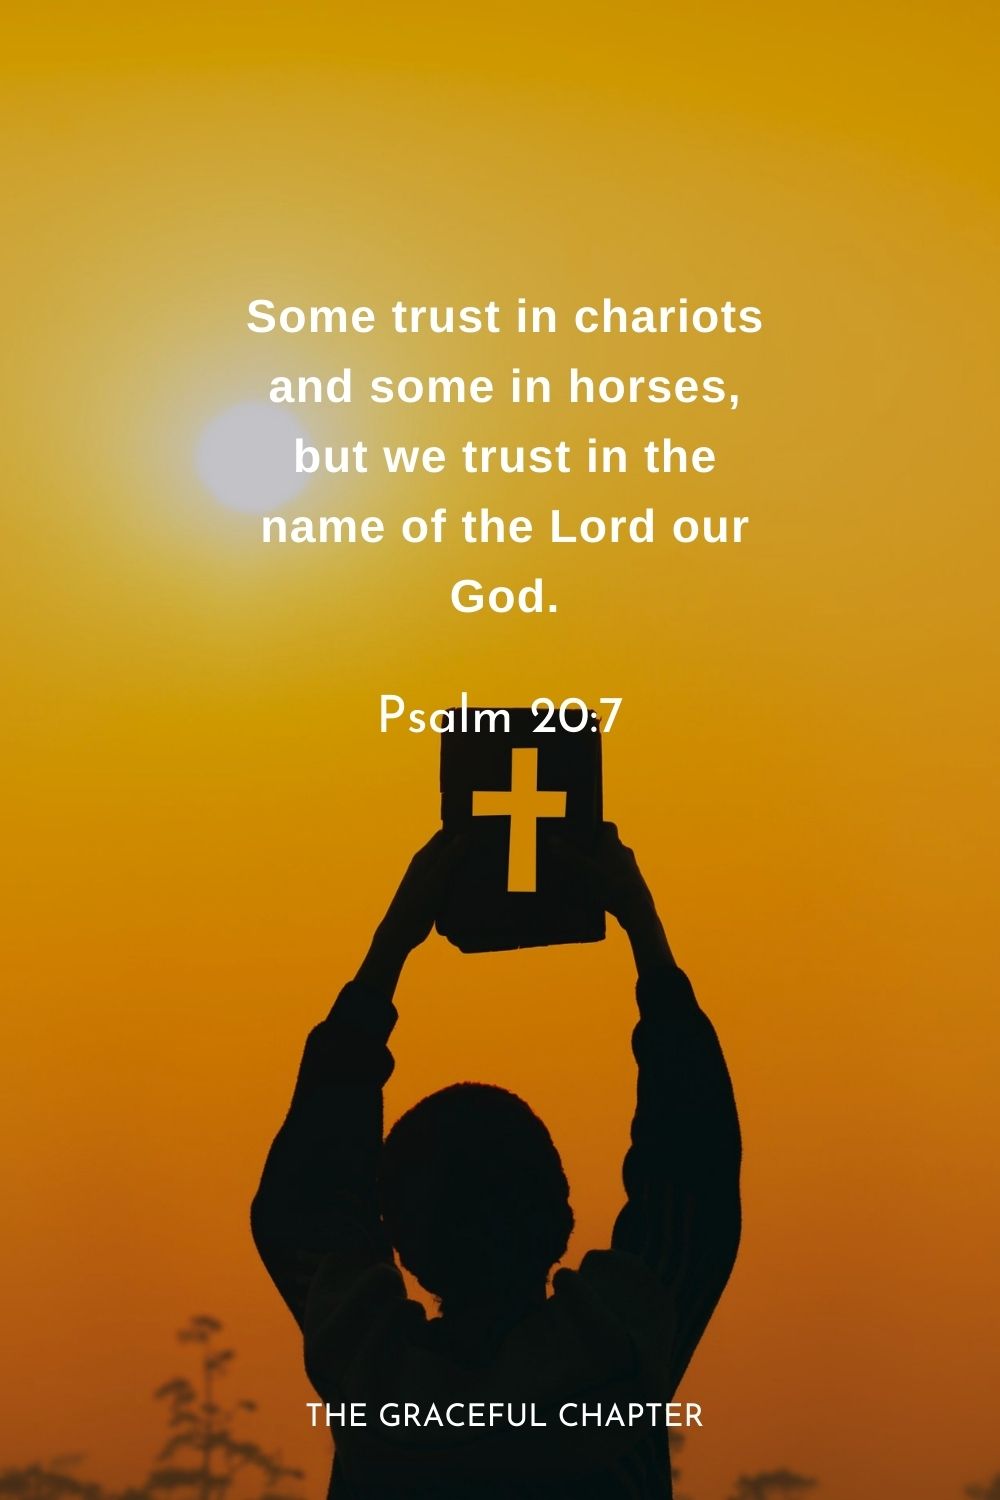 Some trust in chariots and some in horses, but we trust in the name of the Lord our God.